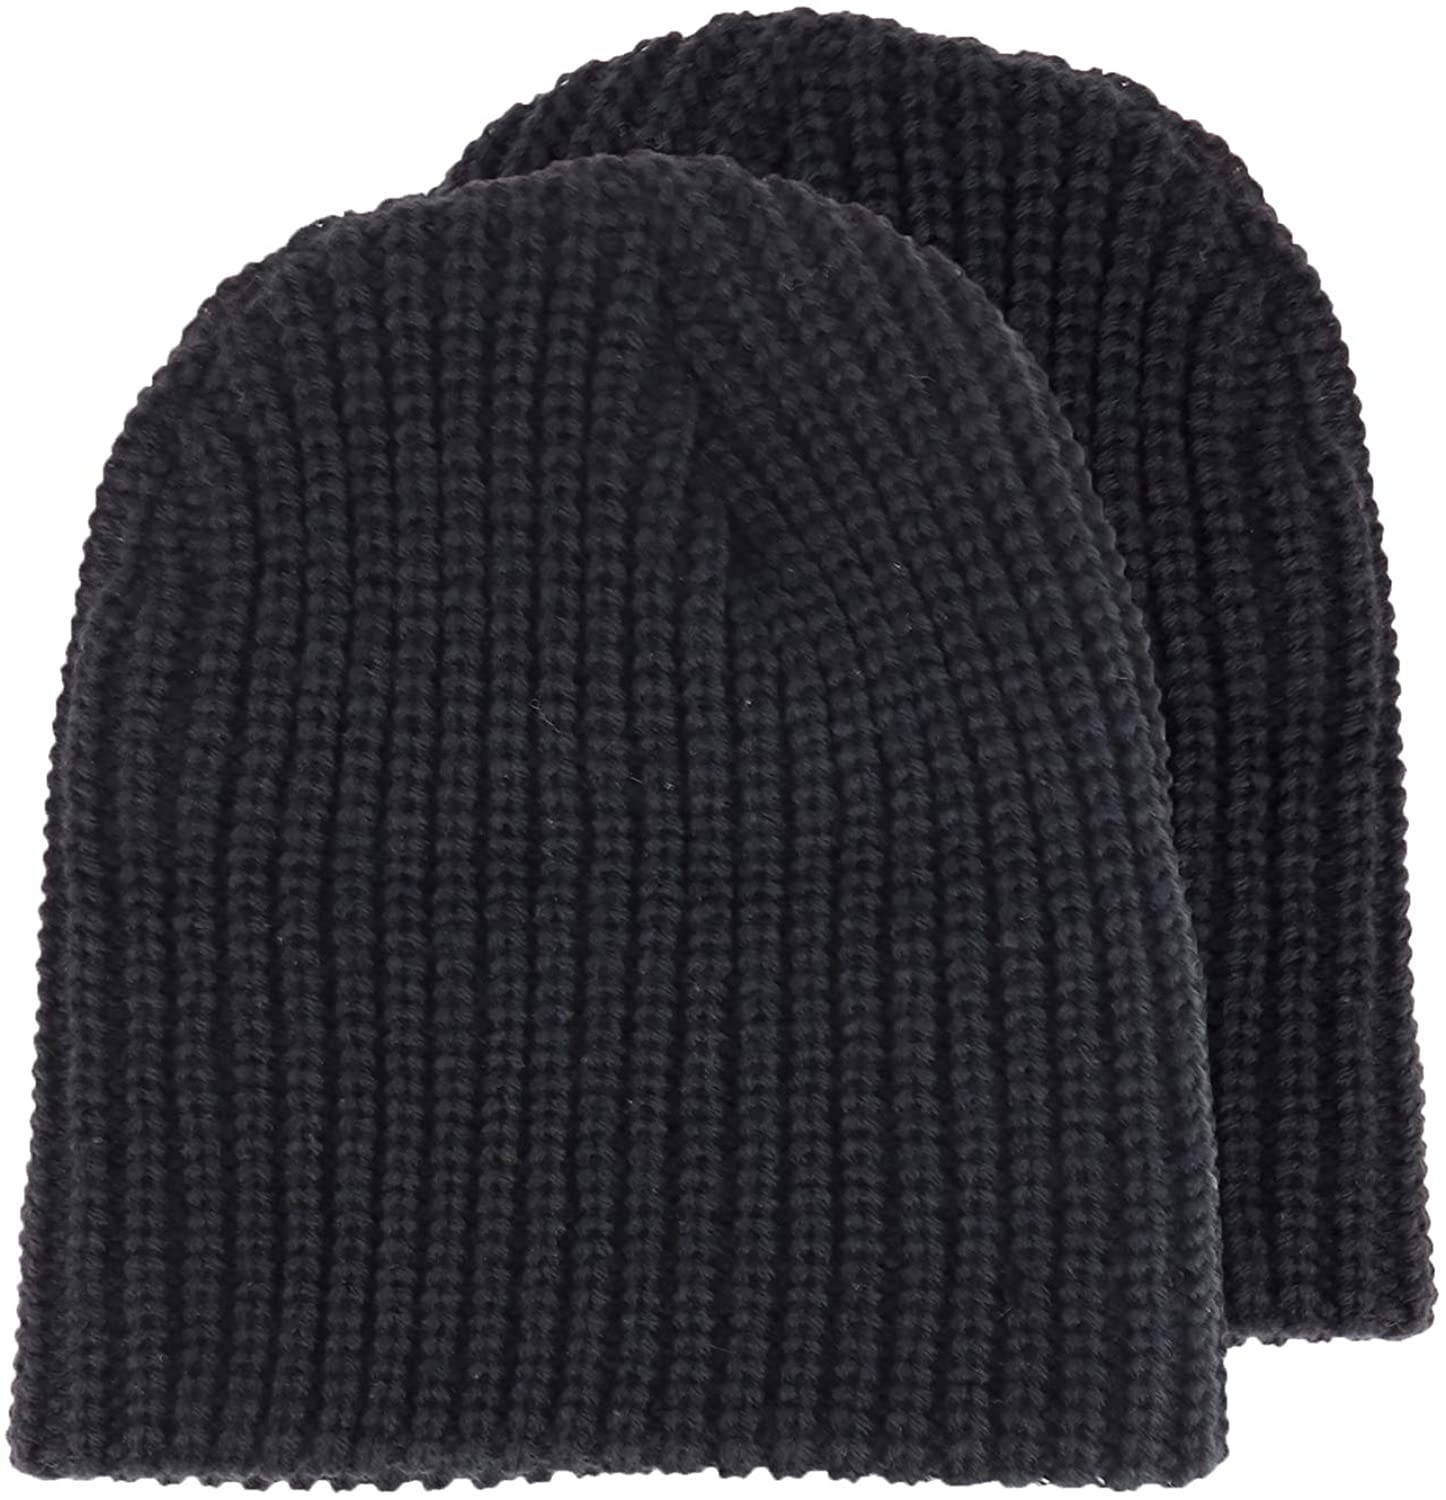 Armycrew Thick Ribbed Knit Winter Short Beanie 2 Pack